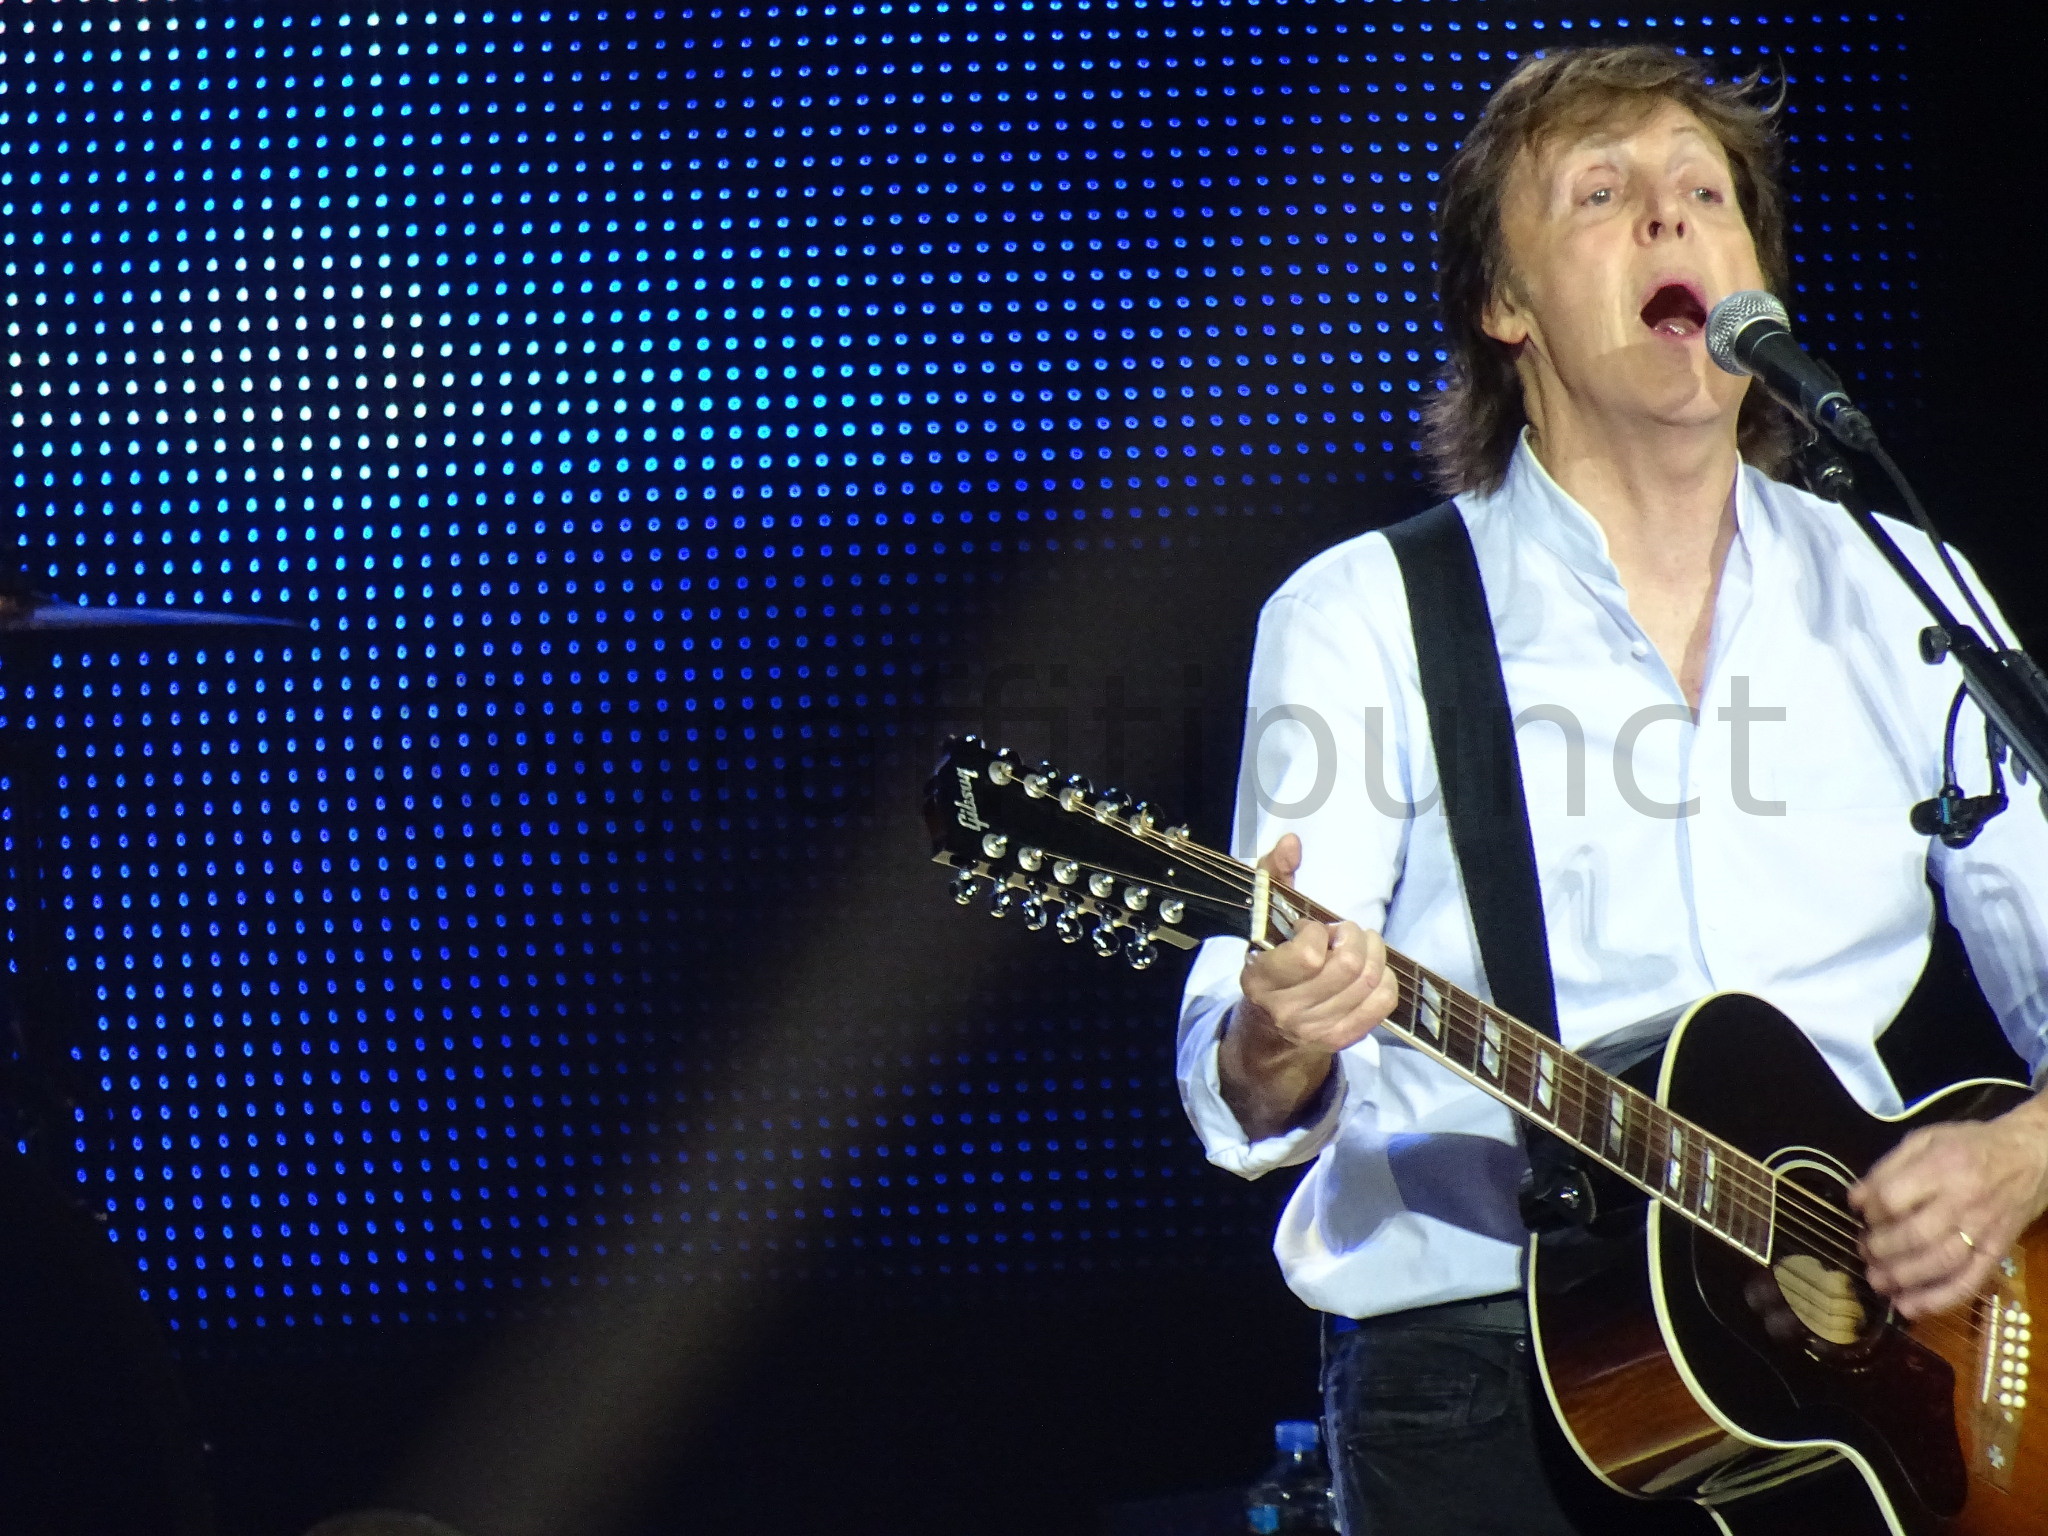 2048x1536 Paul McCartney at The O2 Arena in London